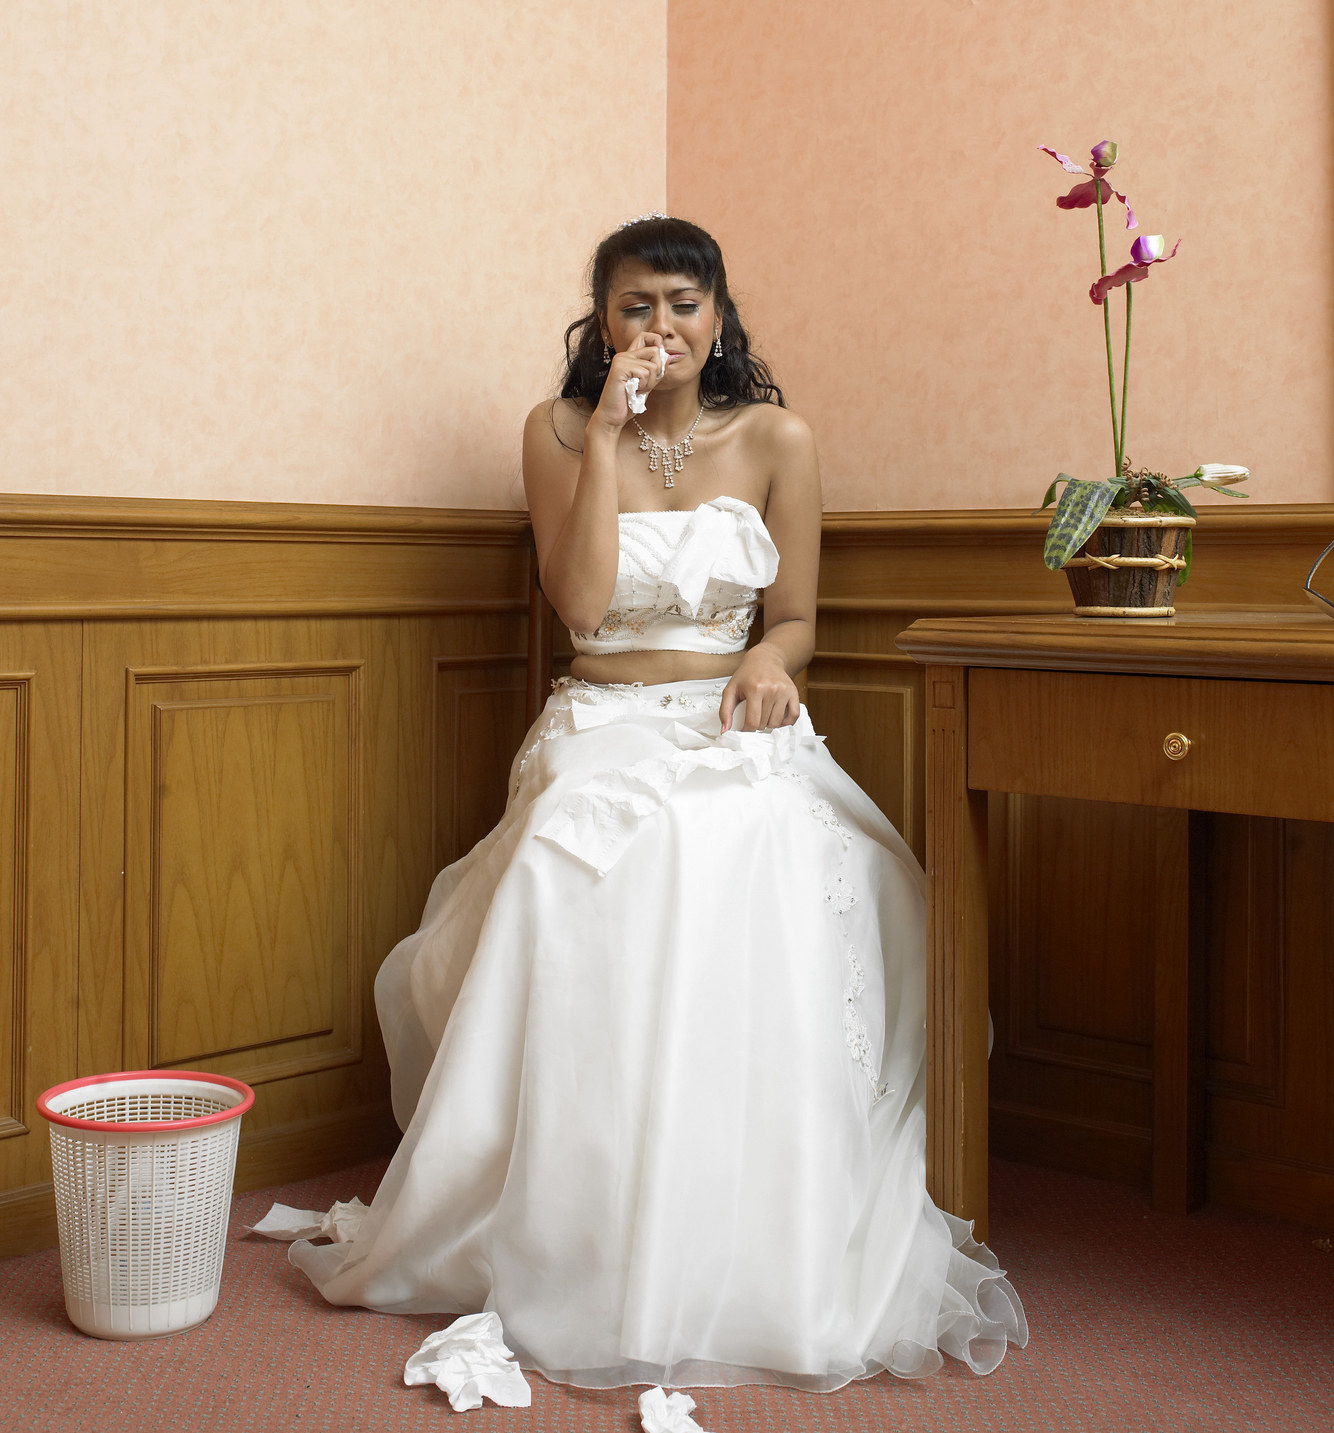 Woman sadly crying on her wedding day